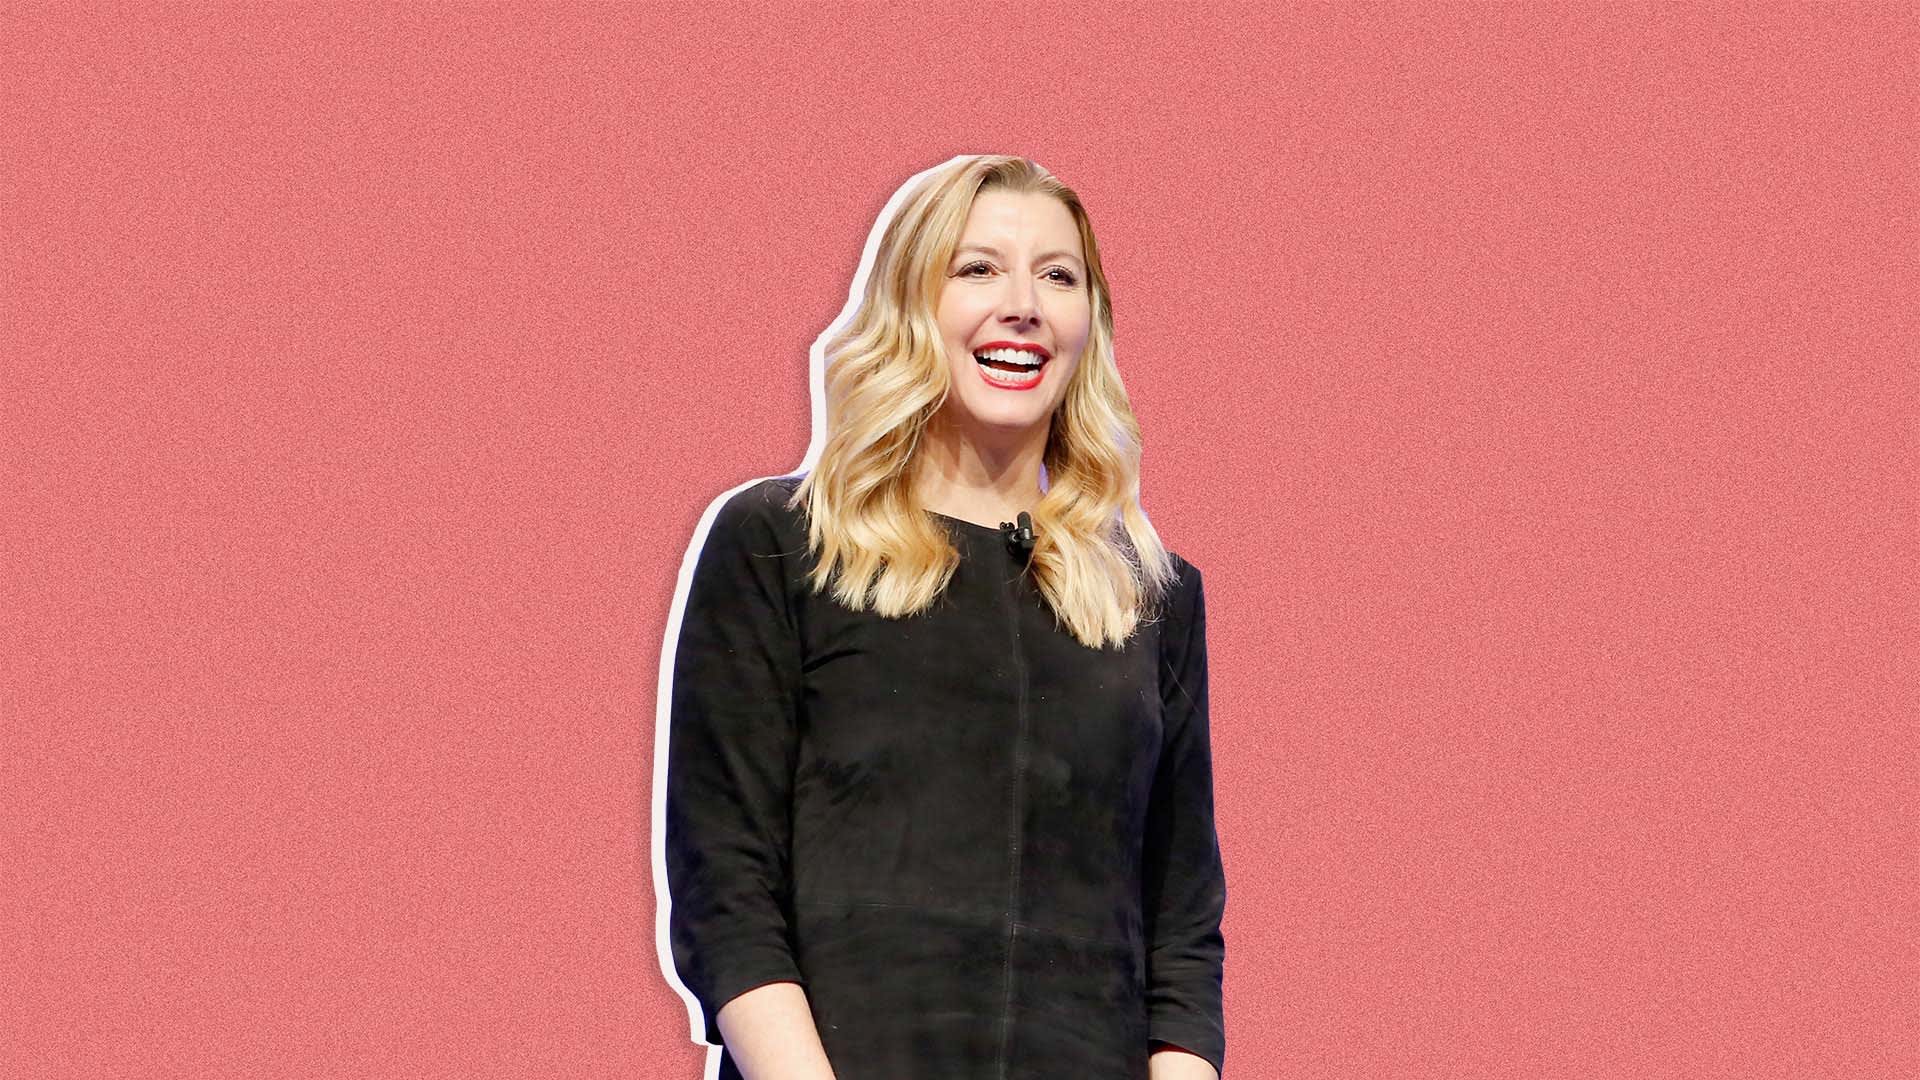 Spanx Founder Sara Blakely Just Gave $10,000 to Her Employees--and a Valuable Lesson to Business Owners